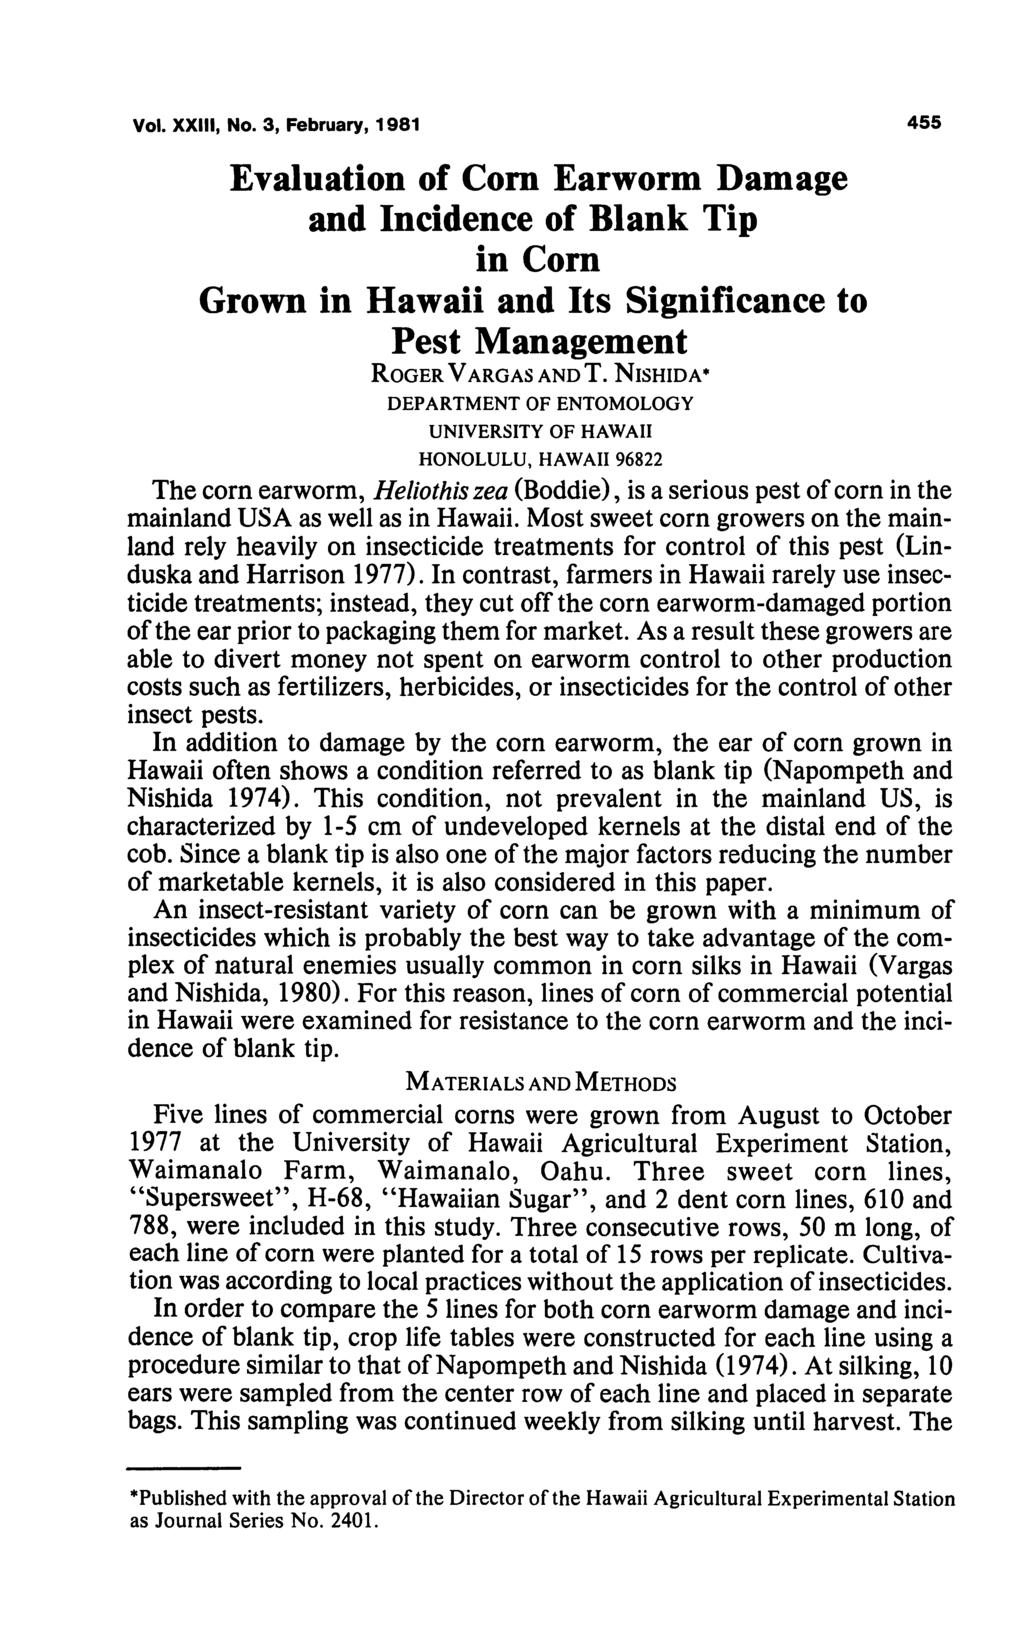 Vol. XXIII, No. 3, February, 1981 455 Evaluation of Corn Damage and Incidence of Blank Tip in Corn Grown in Hawaii and Its Significance to Pest Management Roger Vargas and T.